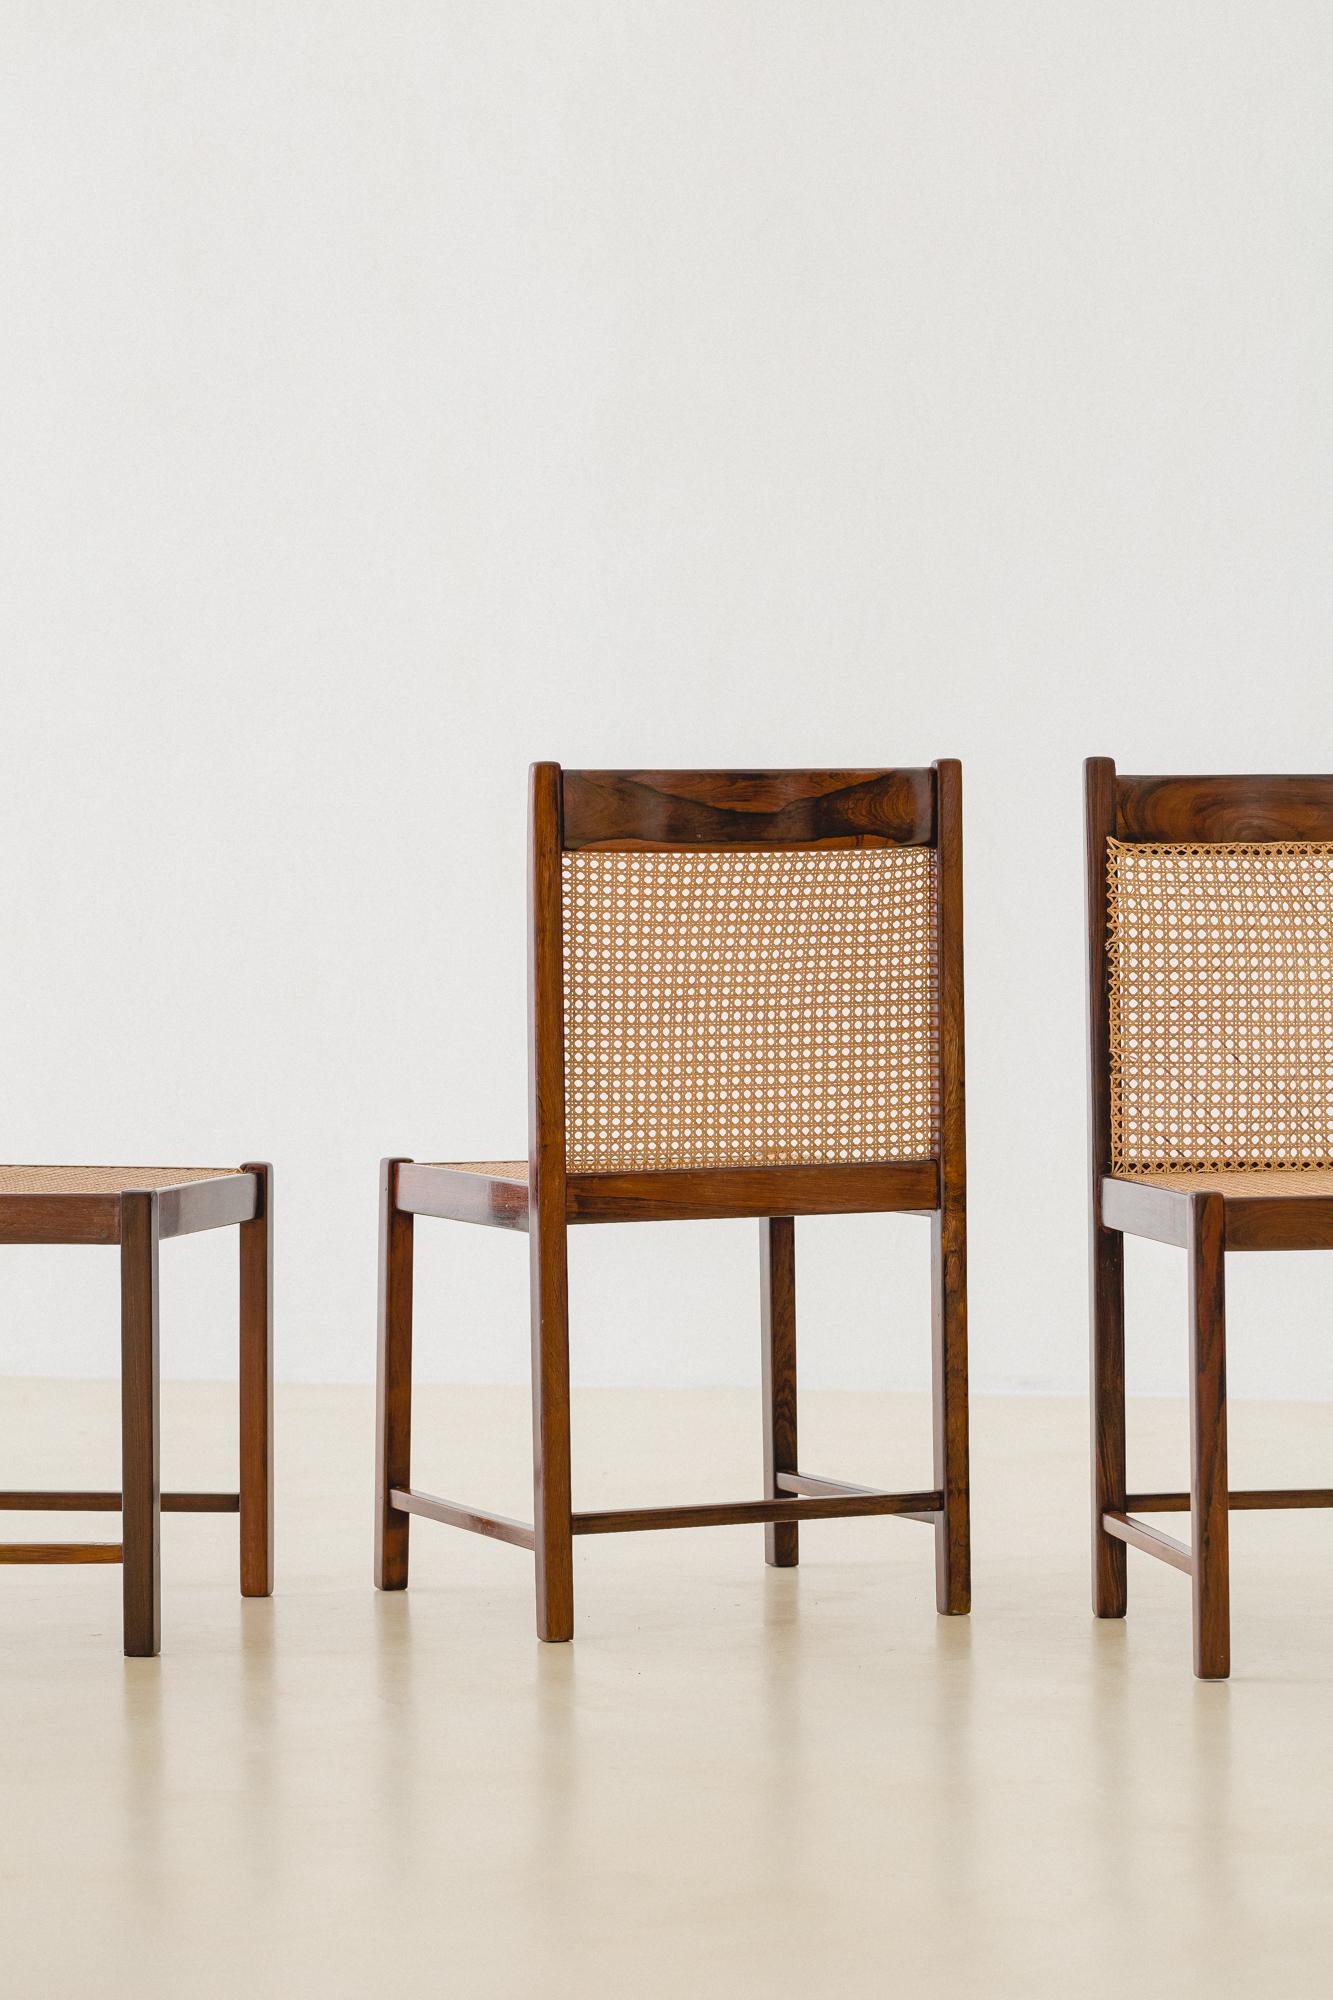 This set of six Rosewood chairs was manufactured by Fatima Arquitetura Interiores (FAI) in the 1960s.

These pieces called our attention for many design reasons. First, the combination between seat and back as a single cane volume. Second, the